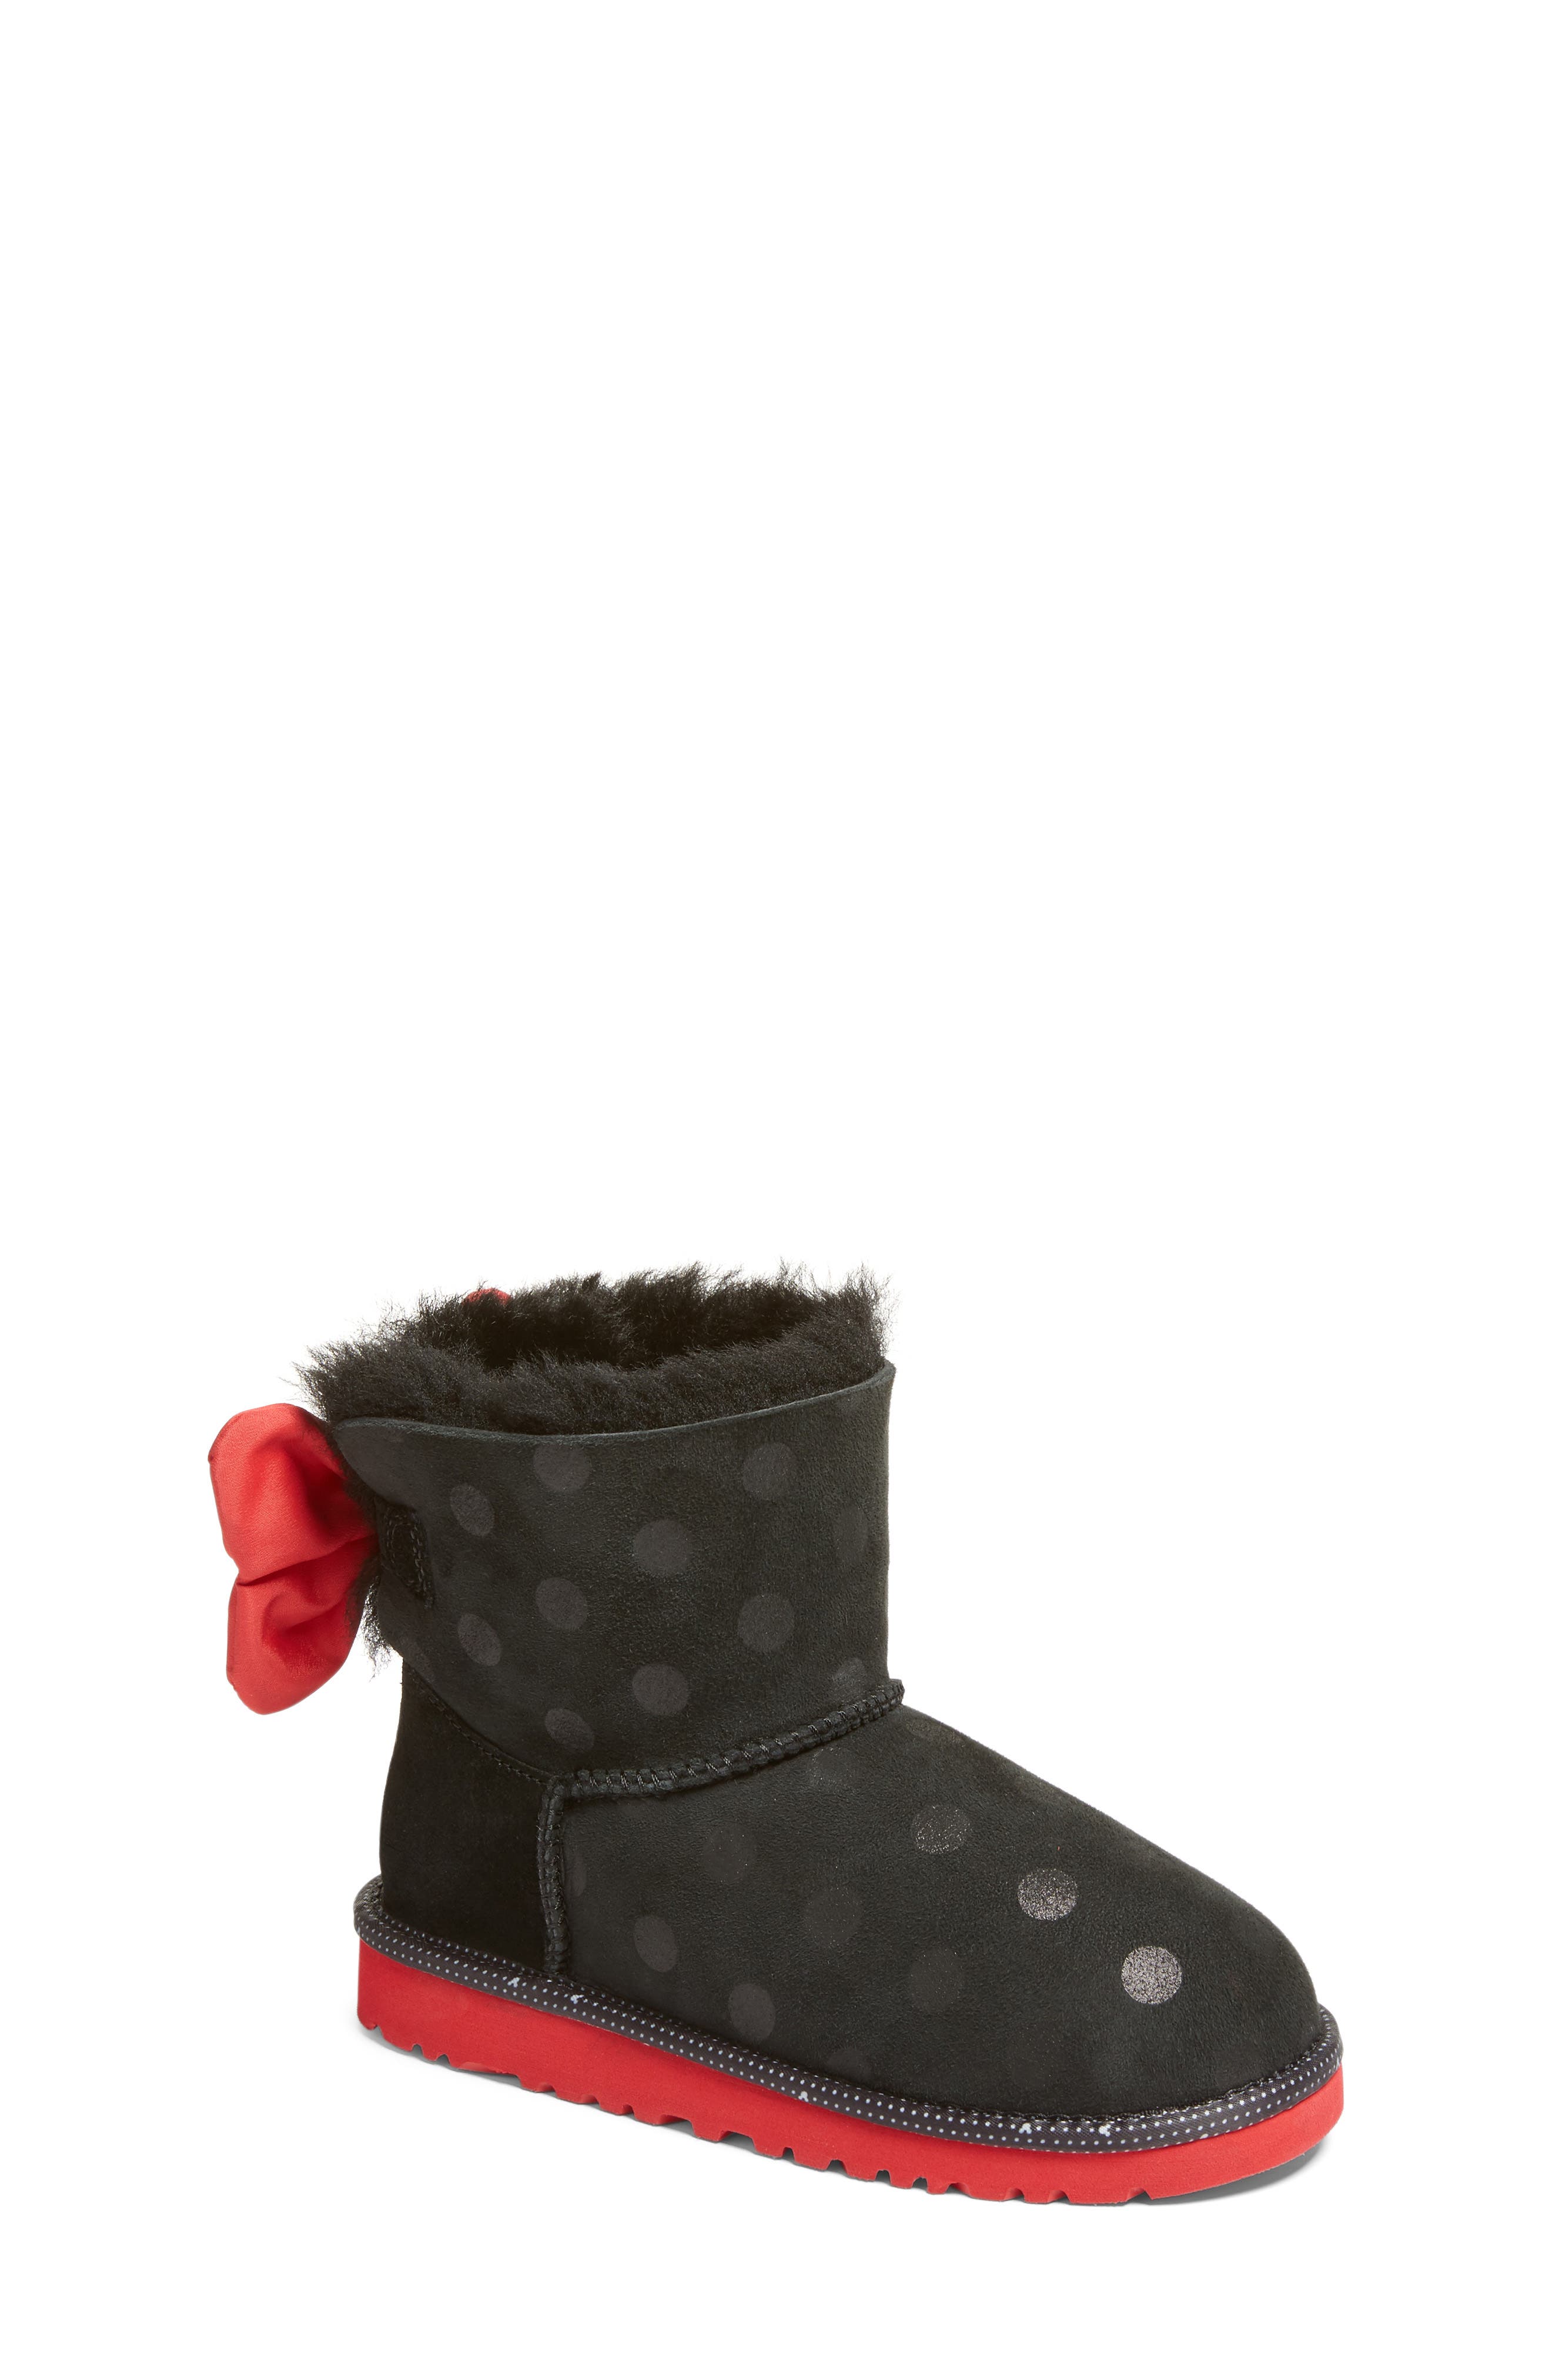 minnie mouse uggs baby